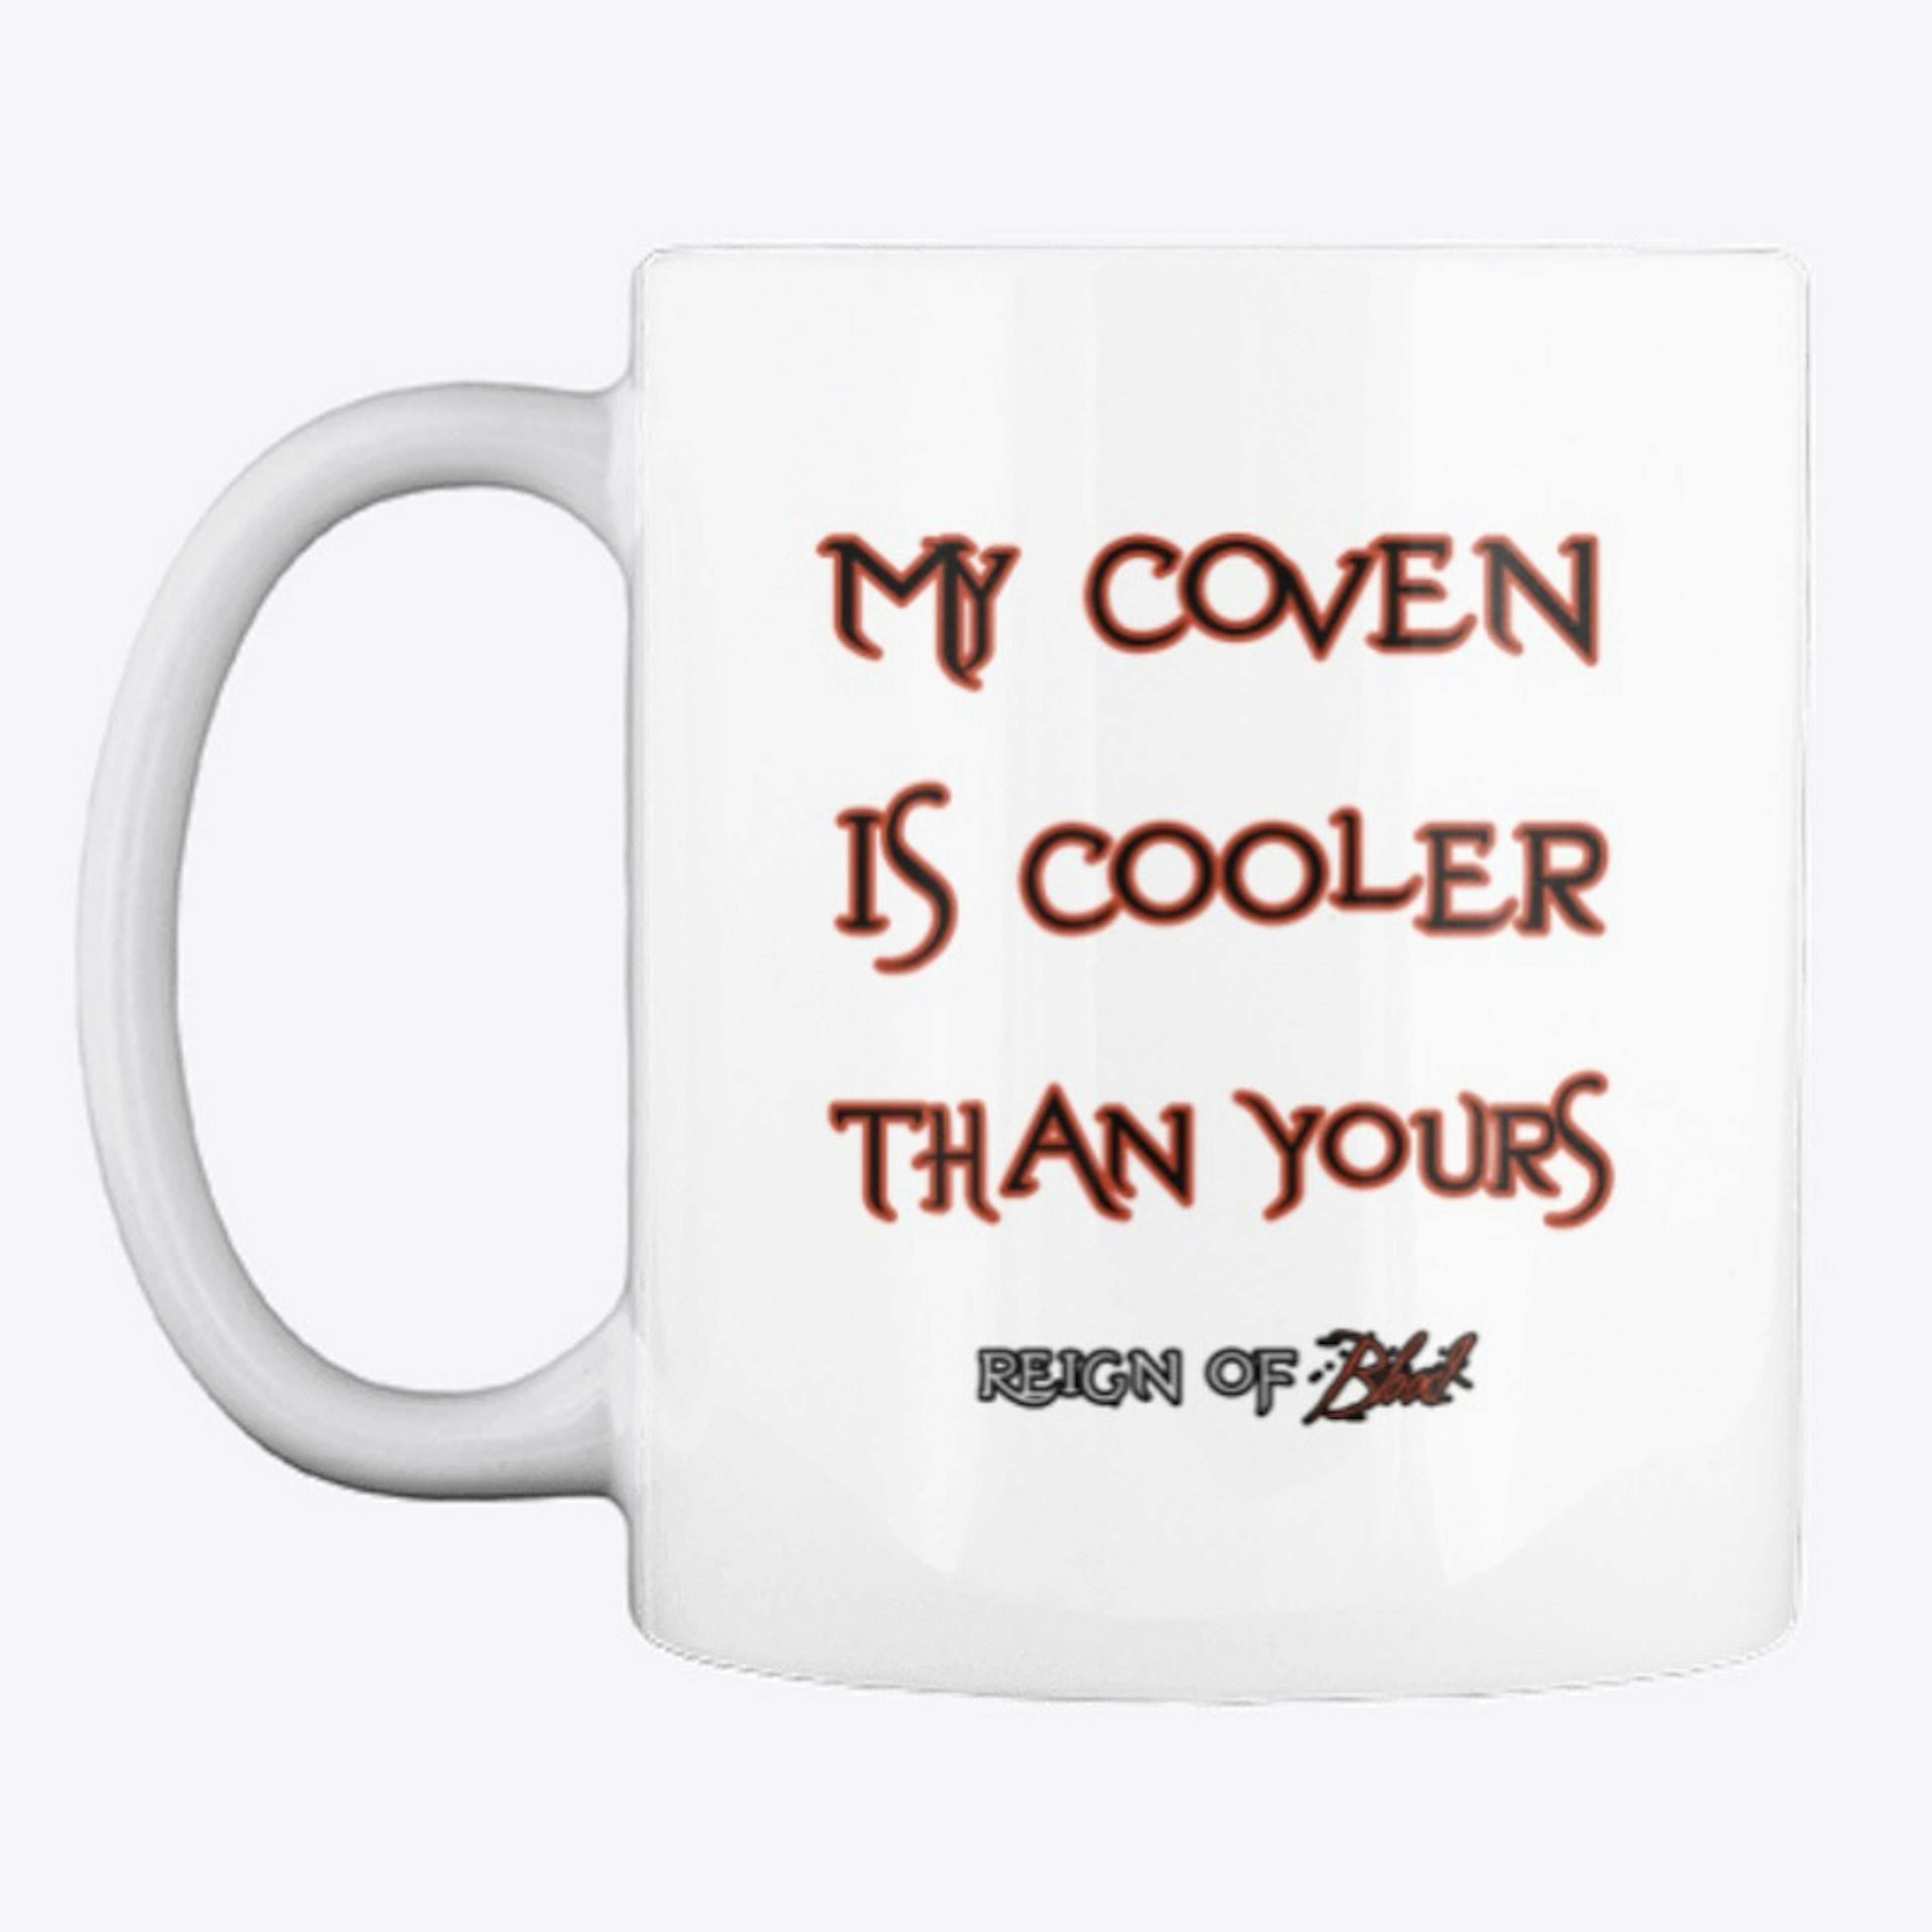 The Cooler Coven